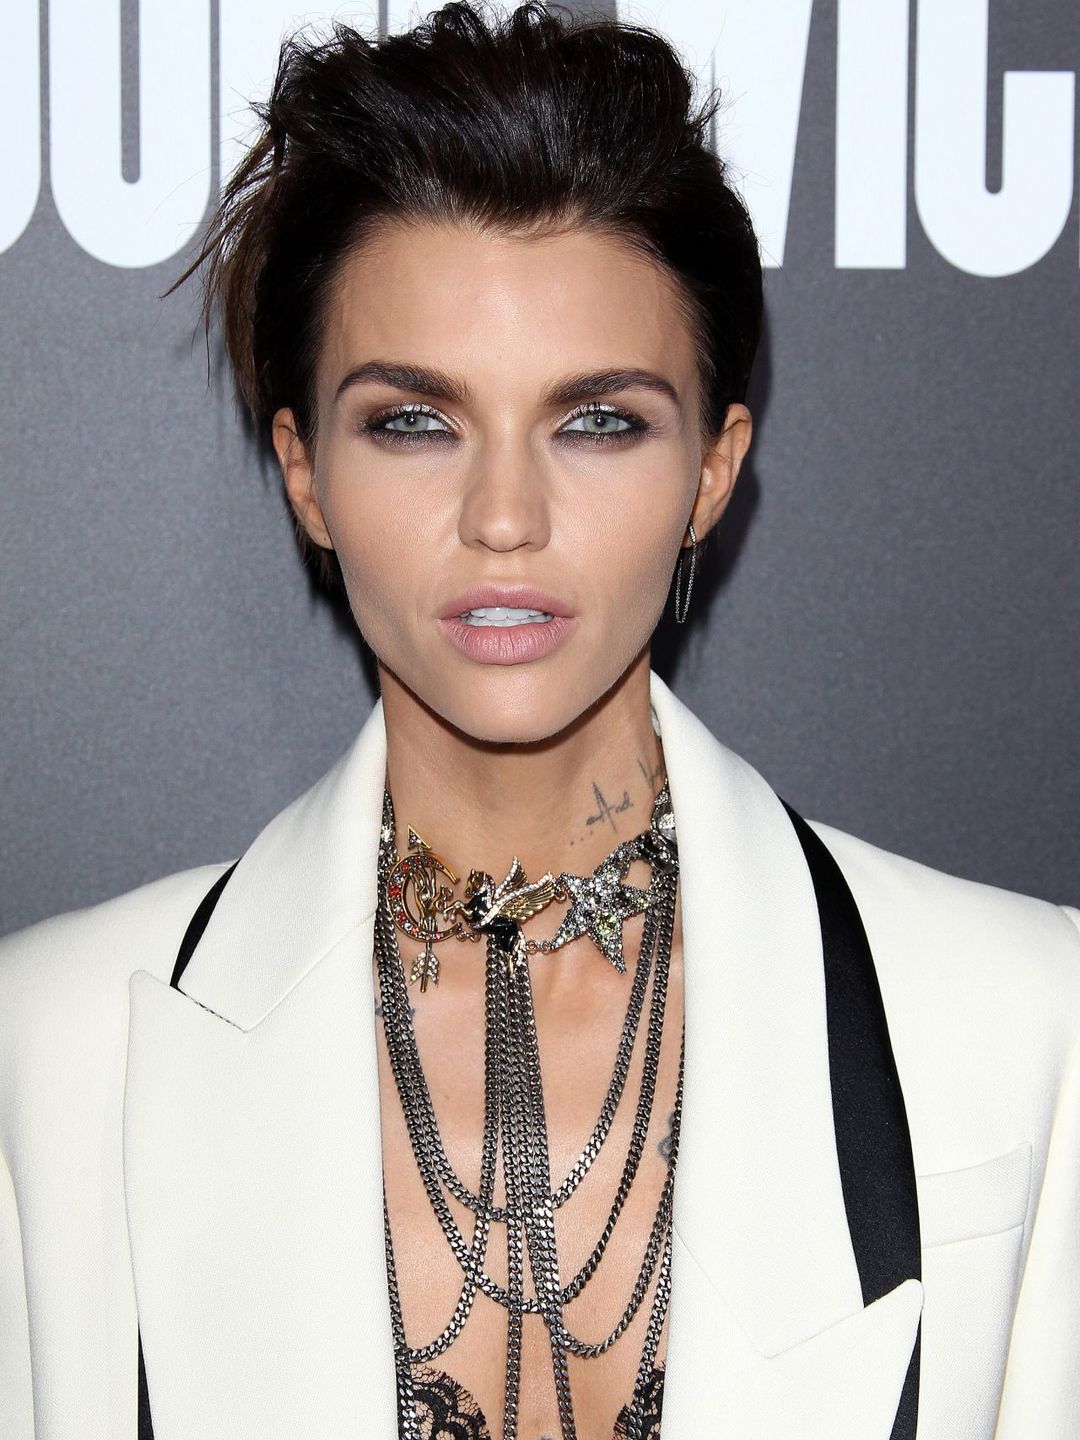 Ruby Rose dating history